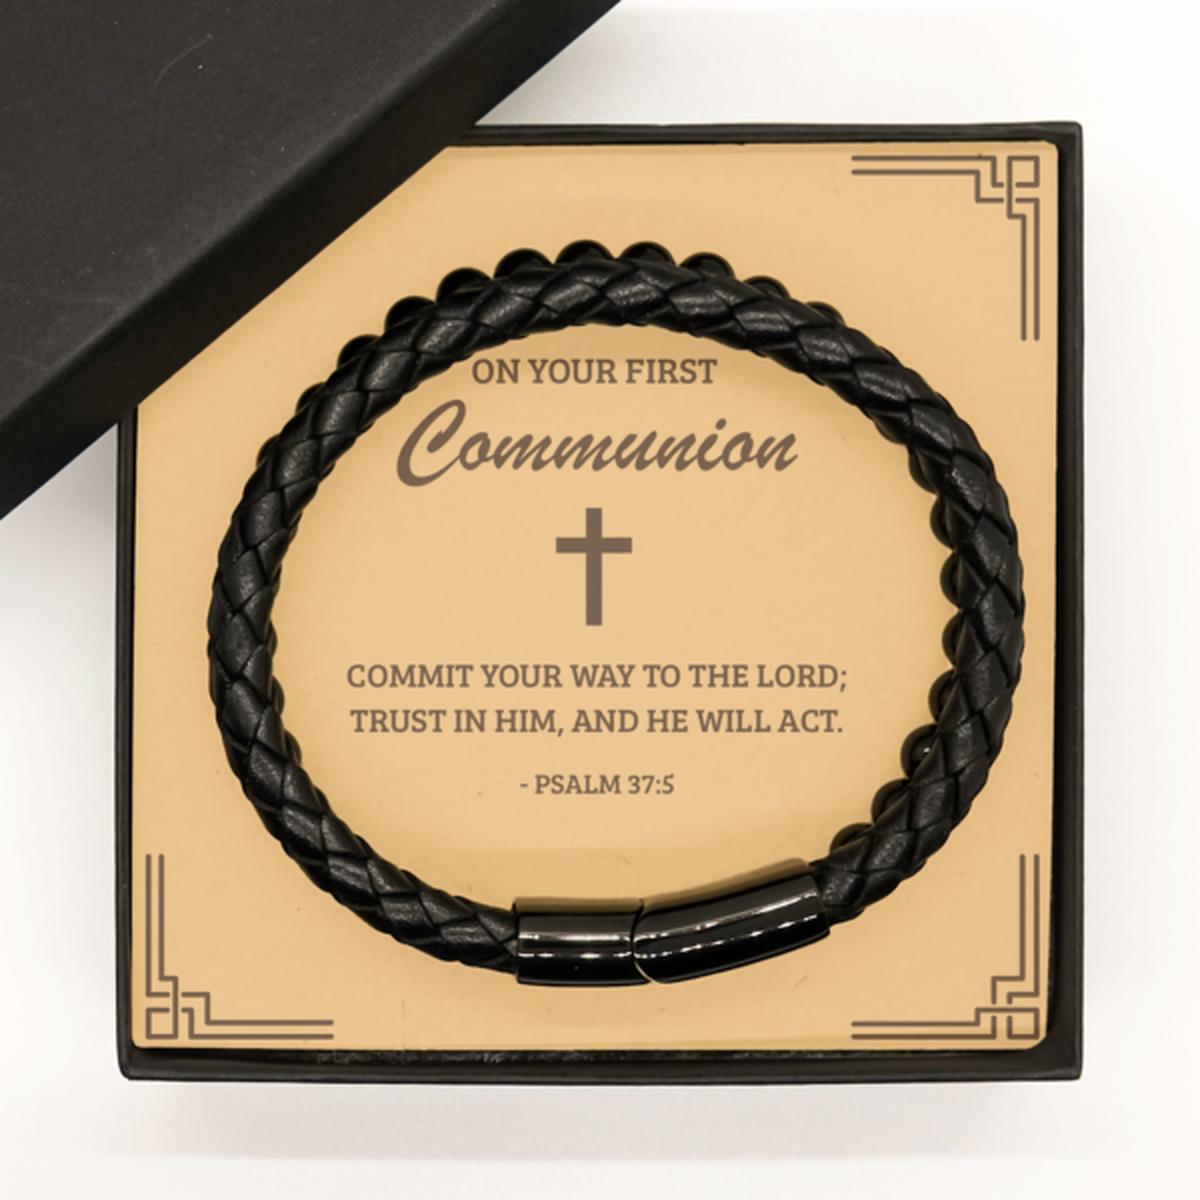 First Communion Gifts for Teenage Boys, Commit your way to the Lord, Stone Leather Bracelet with Bible Verse Message Card, Religious Catholic Bracelet for Son, Grandson, Dad, Godfather